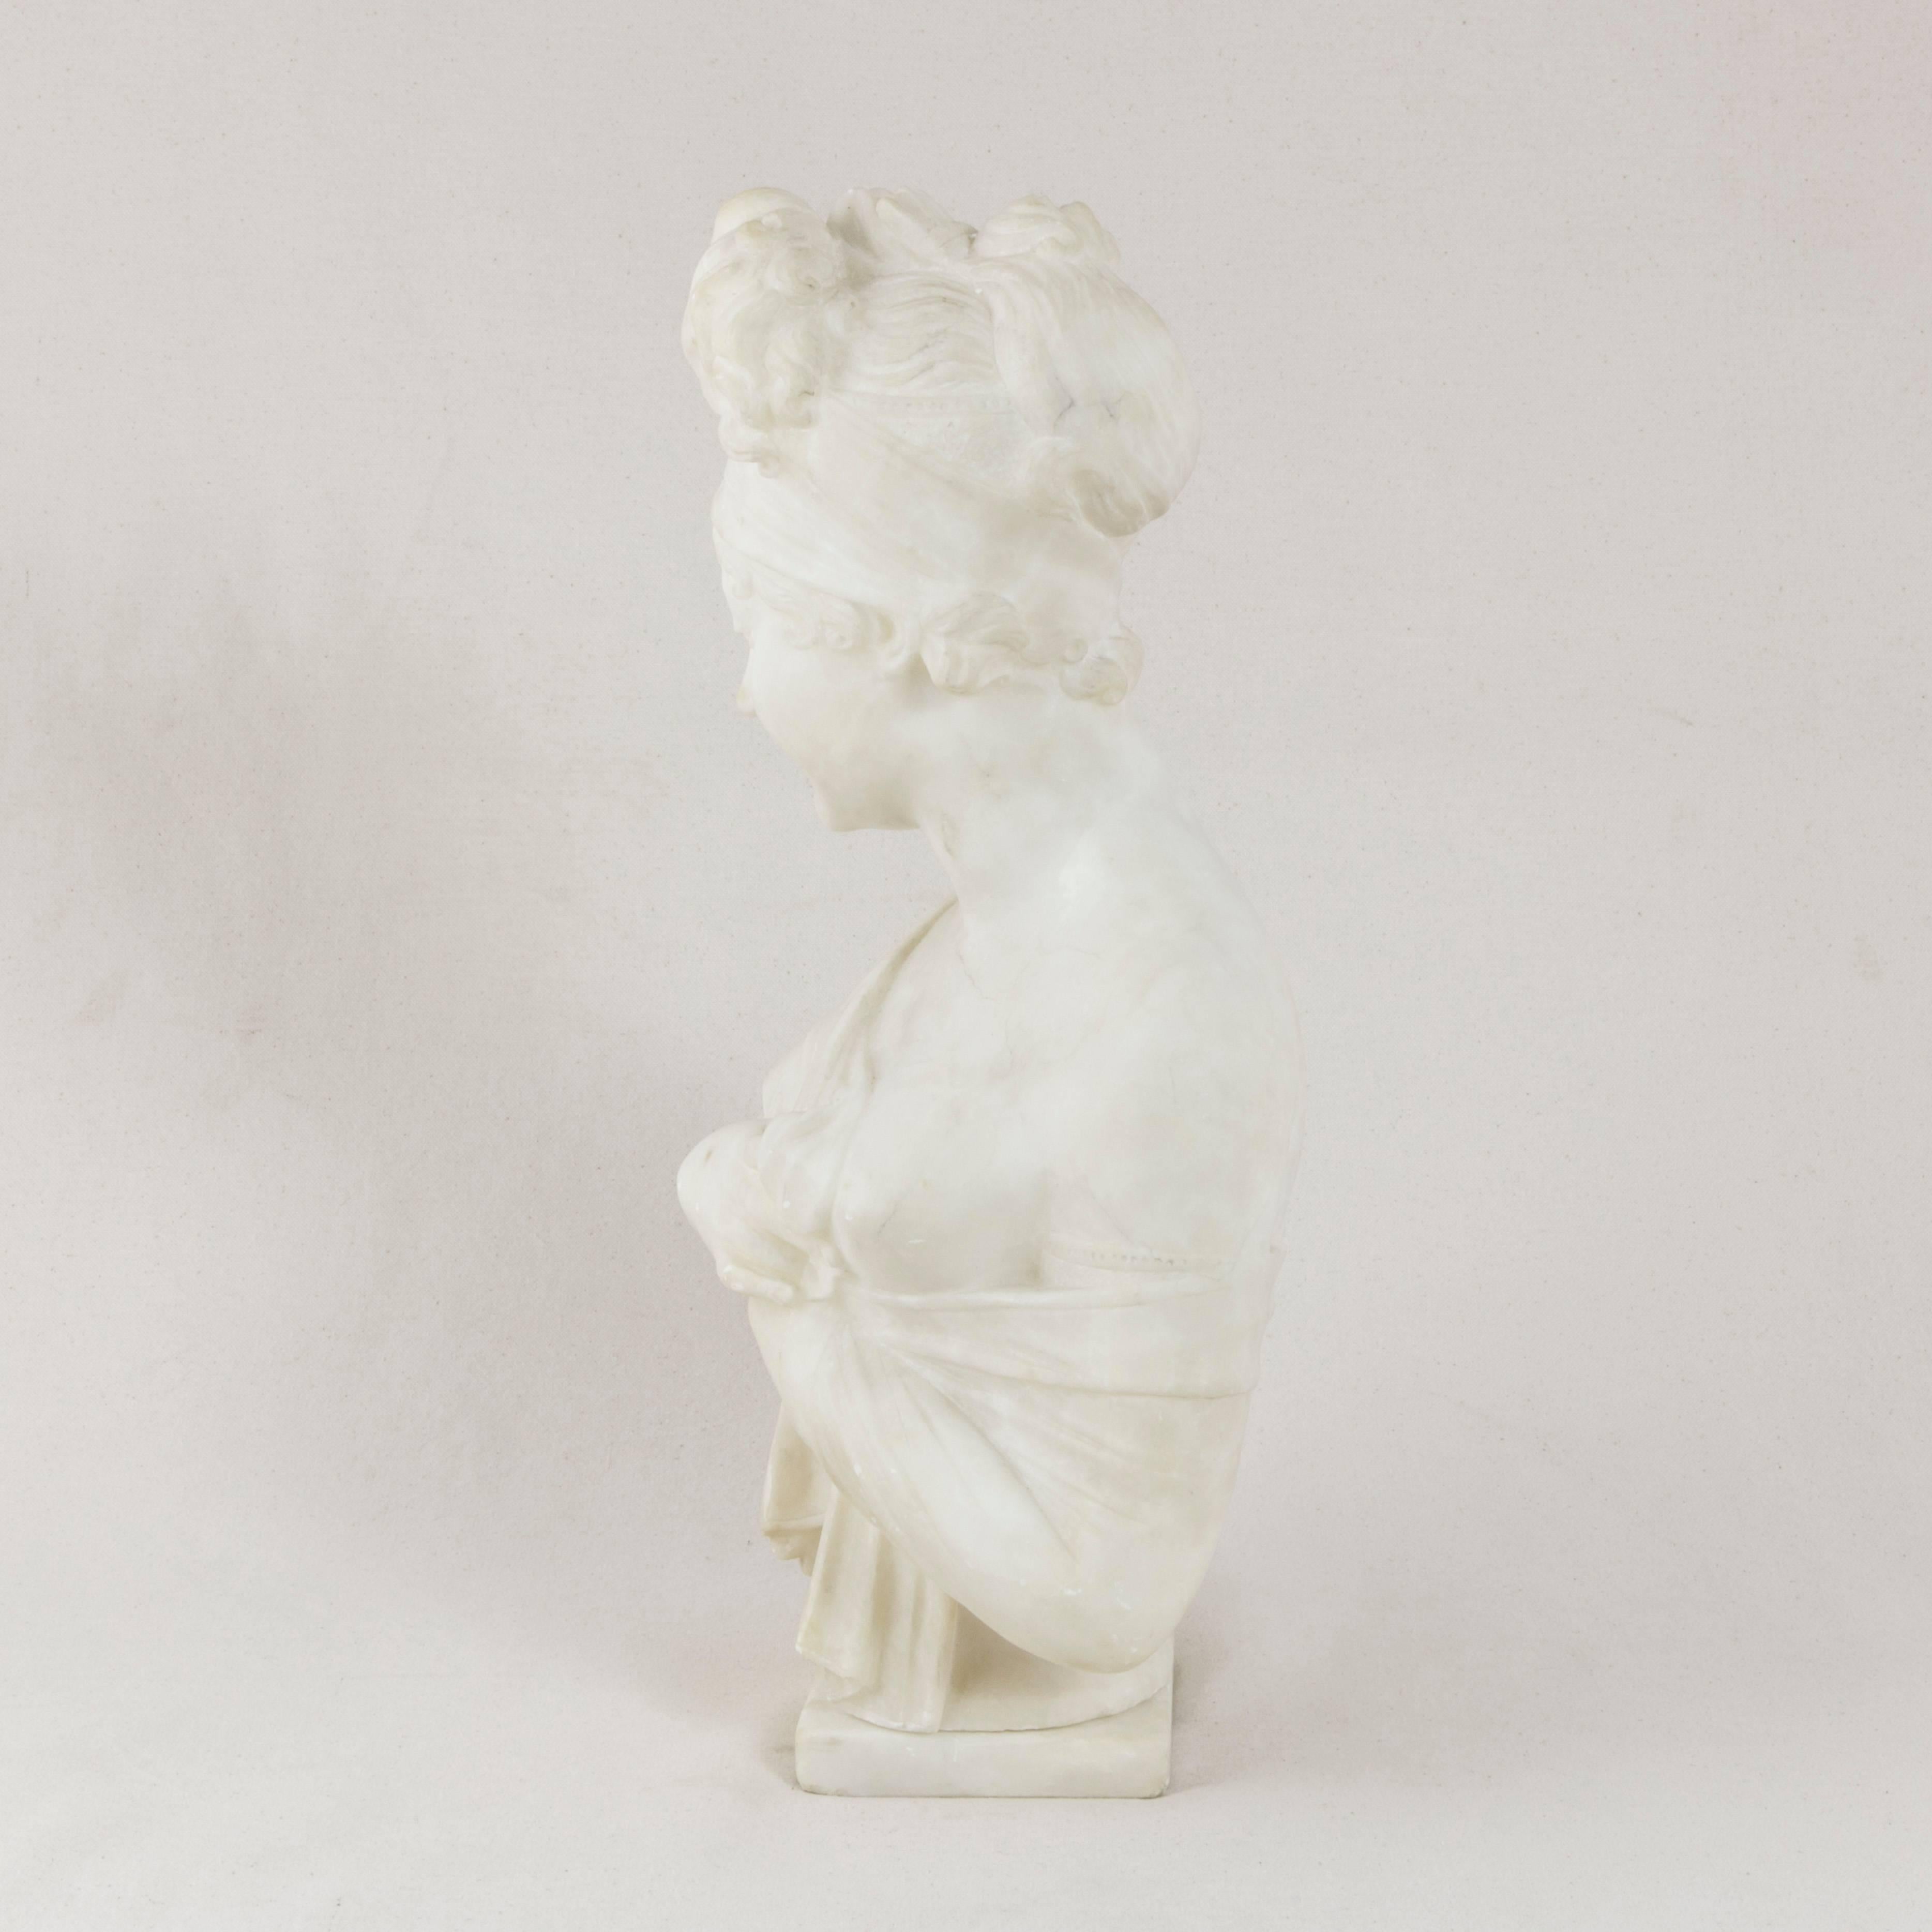 Early 20th Century French Marble Bust or Sculpture of Madame Juliette Recamier, circa 1900